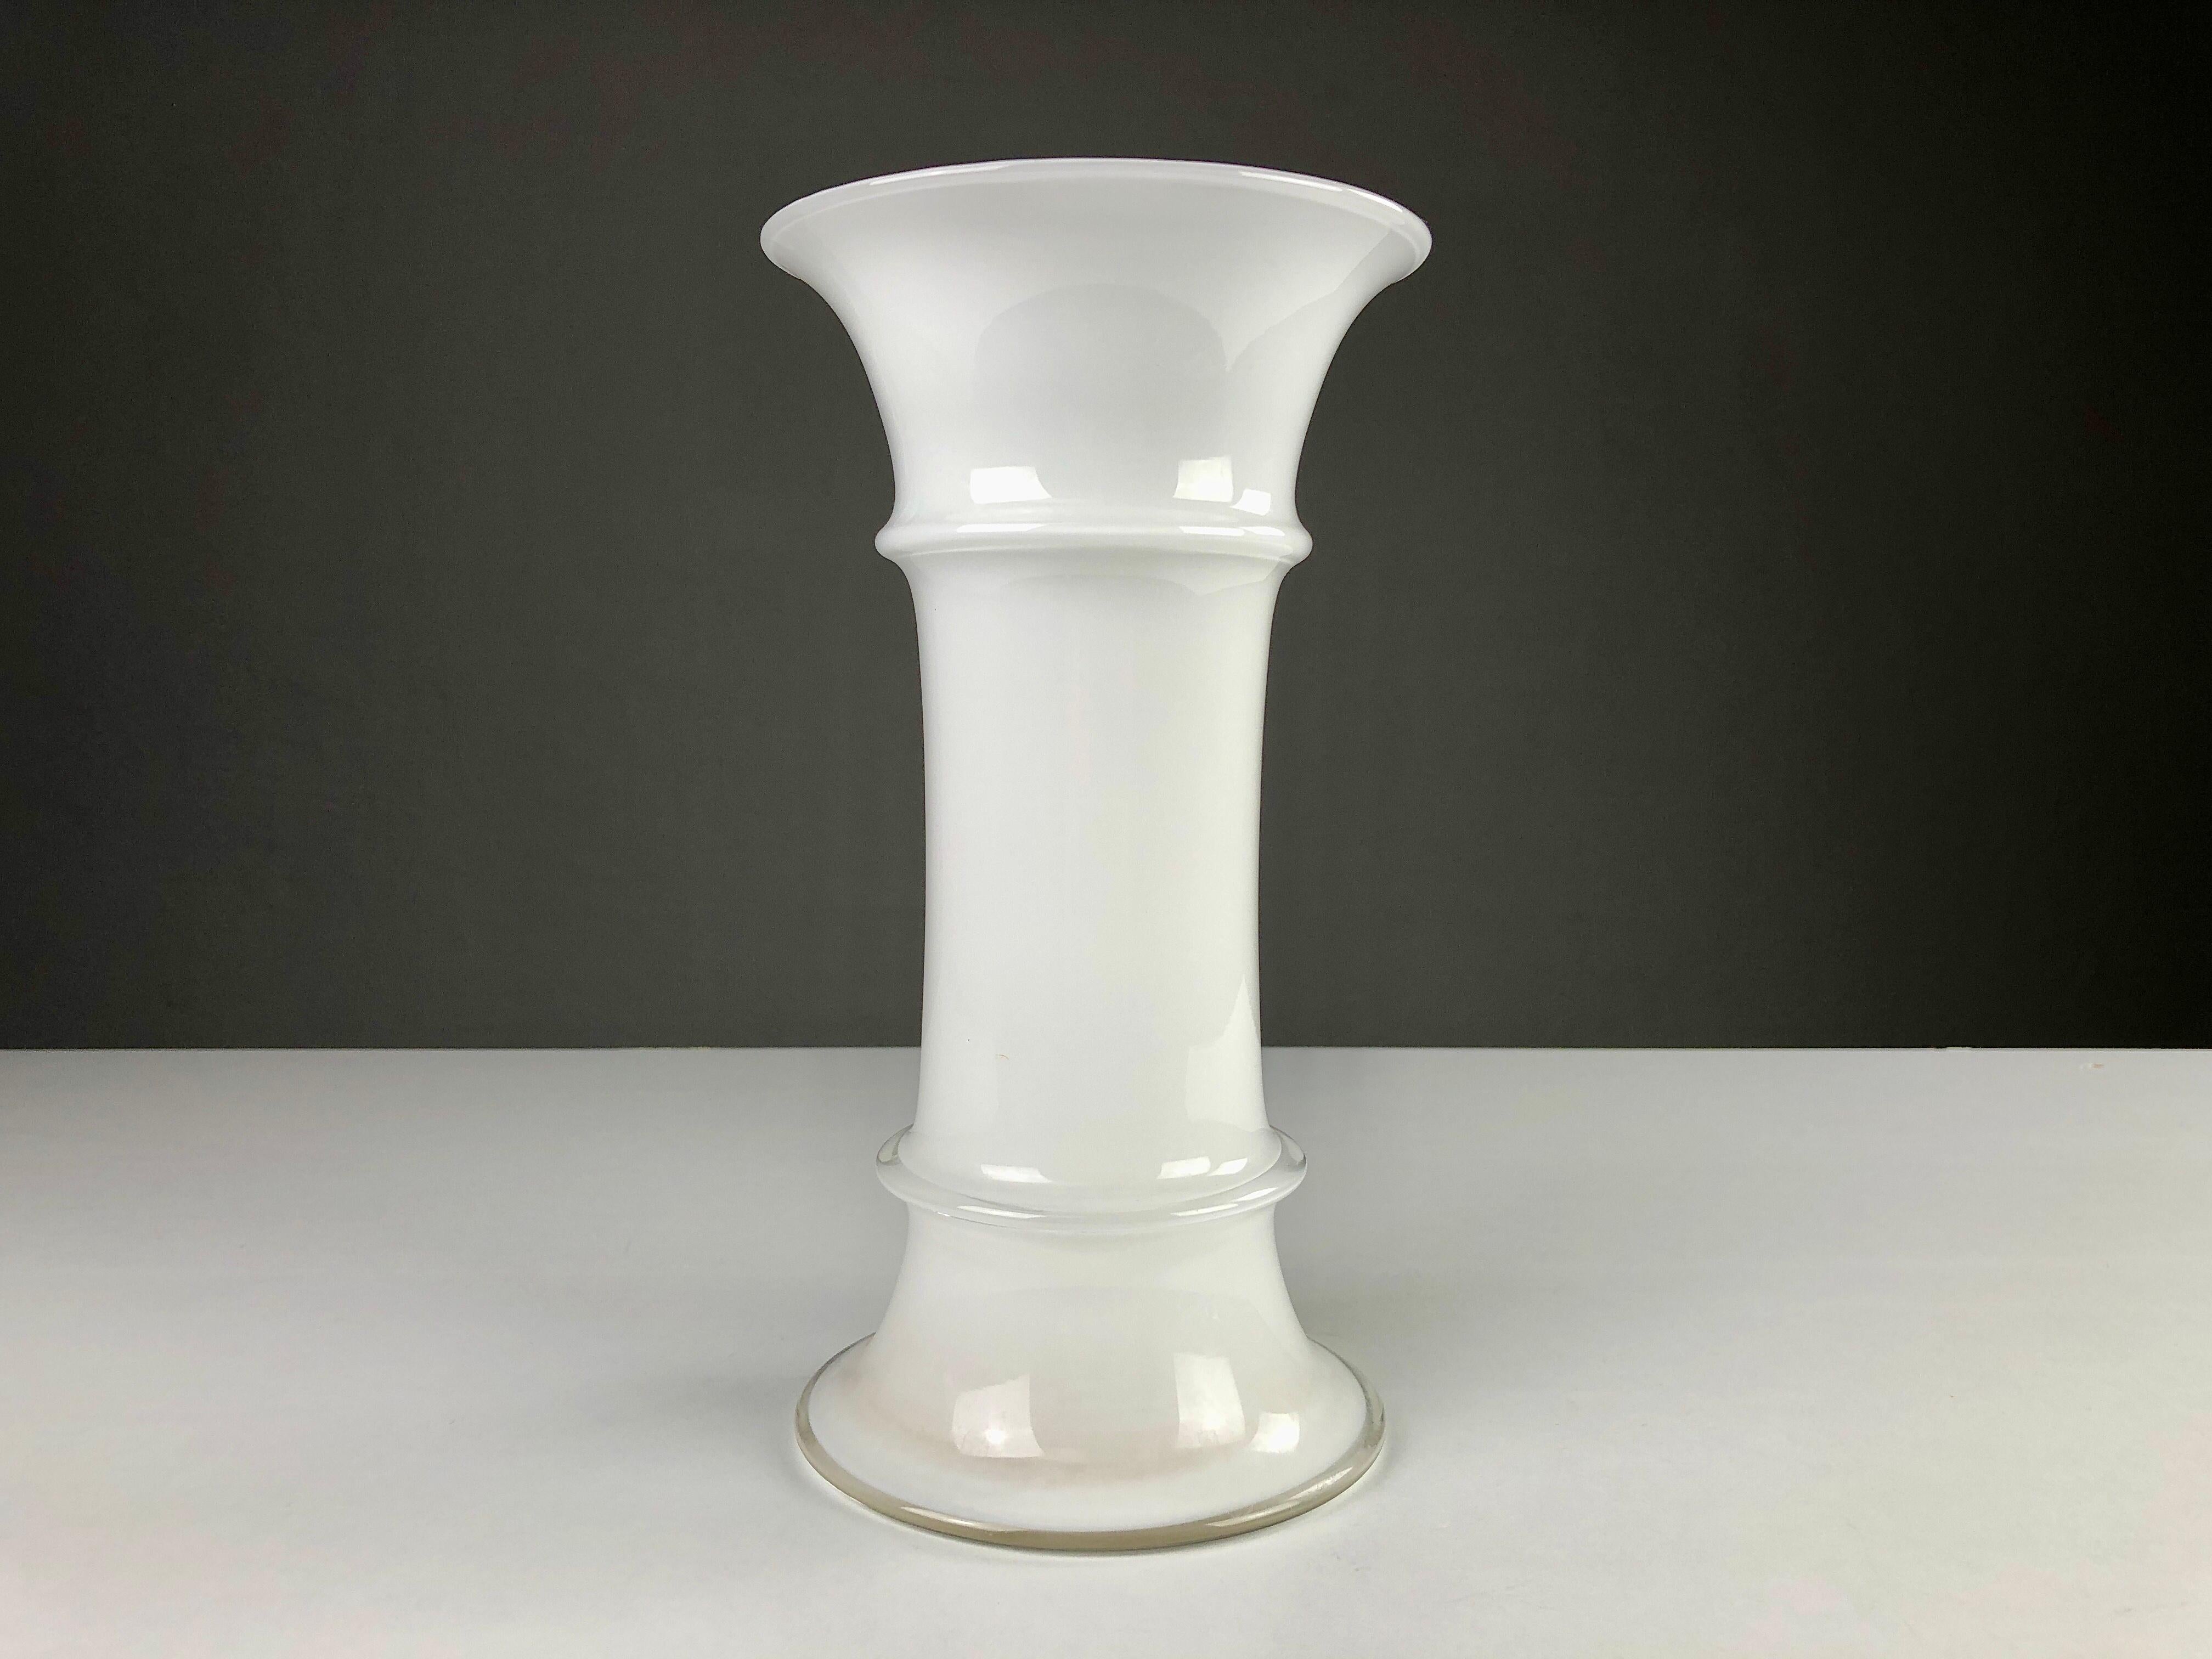 1980s Danish Handblown Glass Vase by Michael Bang for Holmegaard

The small art white glass vase in very good condition.

Michael Bang (1942-2013) was the son of Jacob E. Bang, Holmegaard’s first designer. In the 1960s - 1980´s, Michael Bang was a